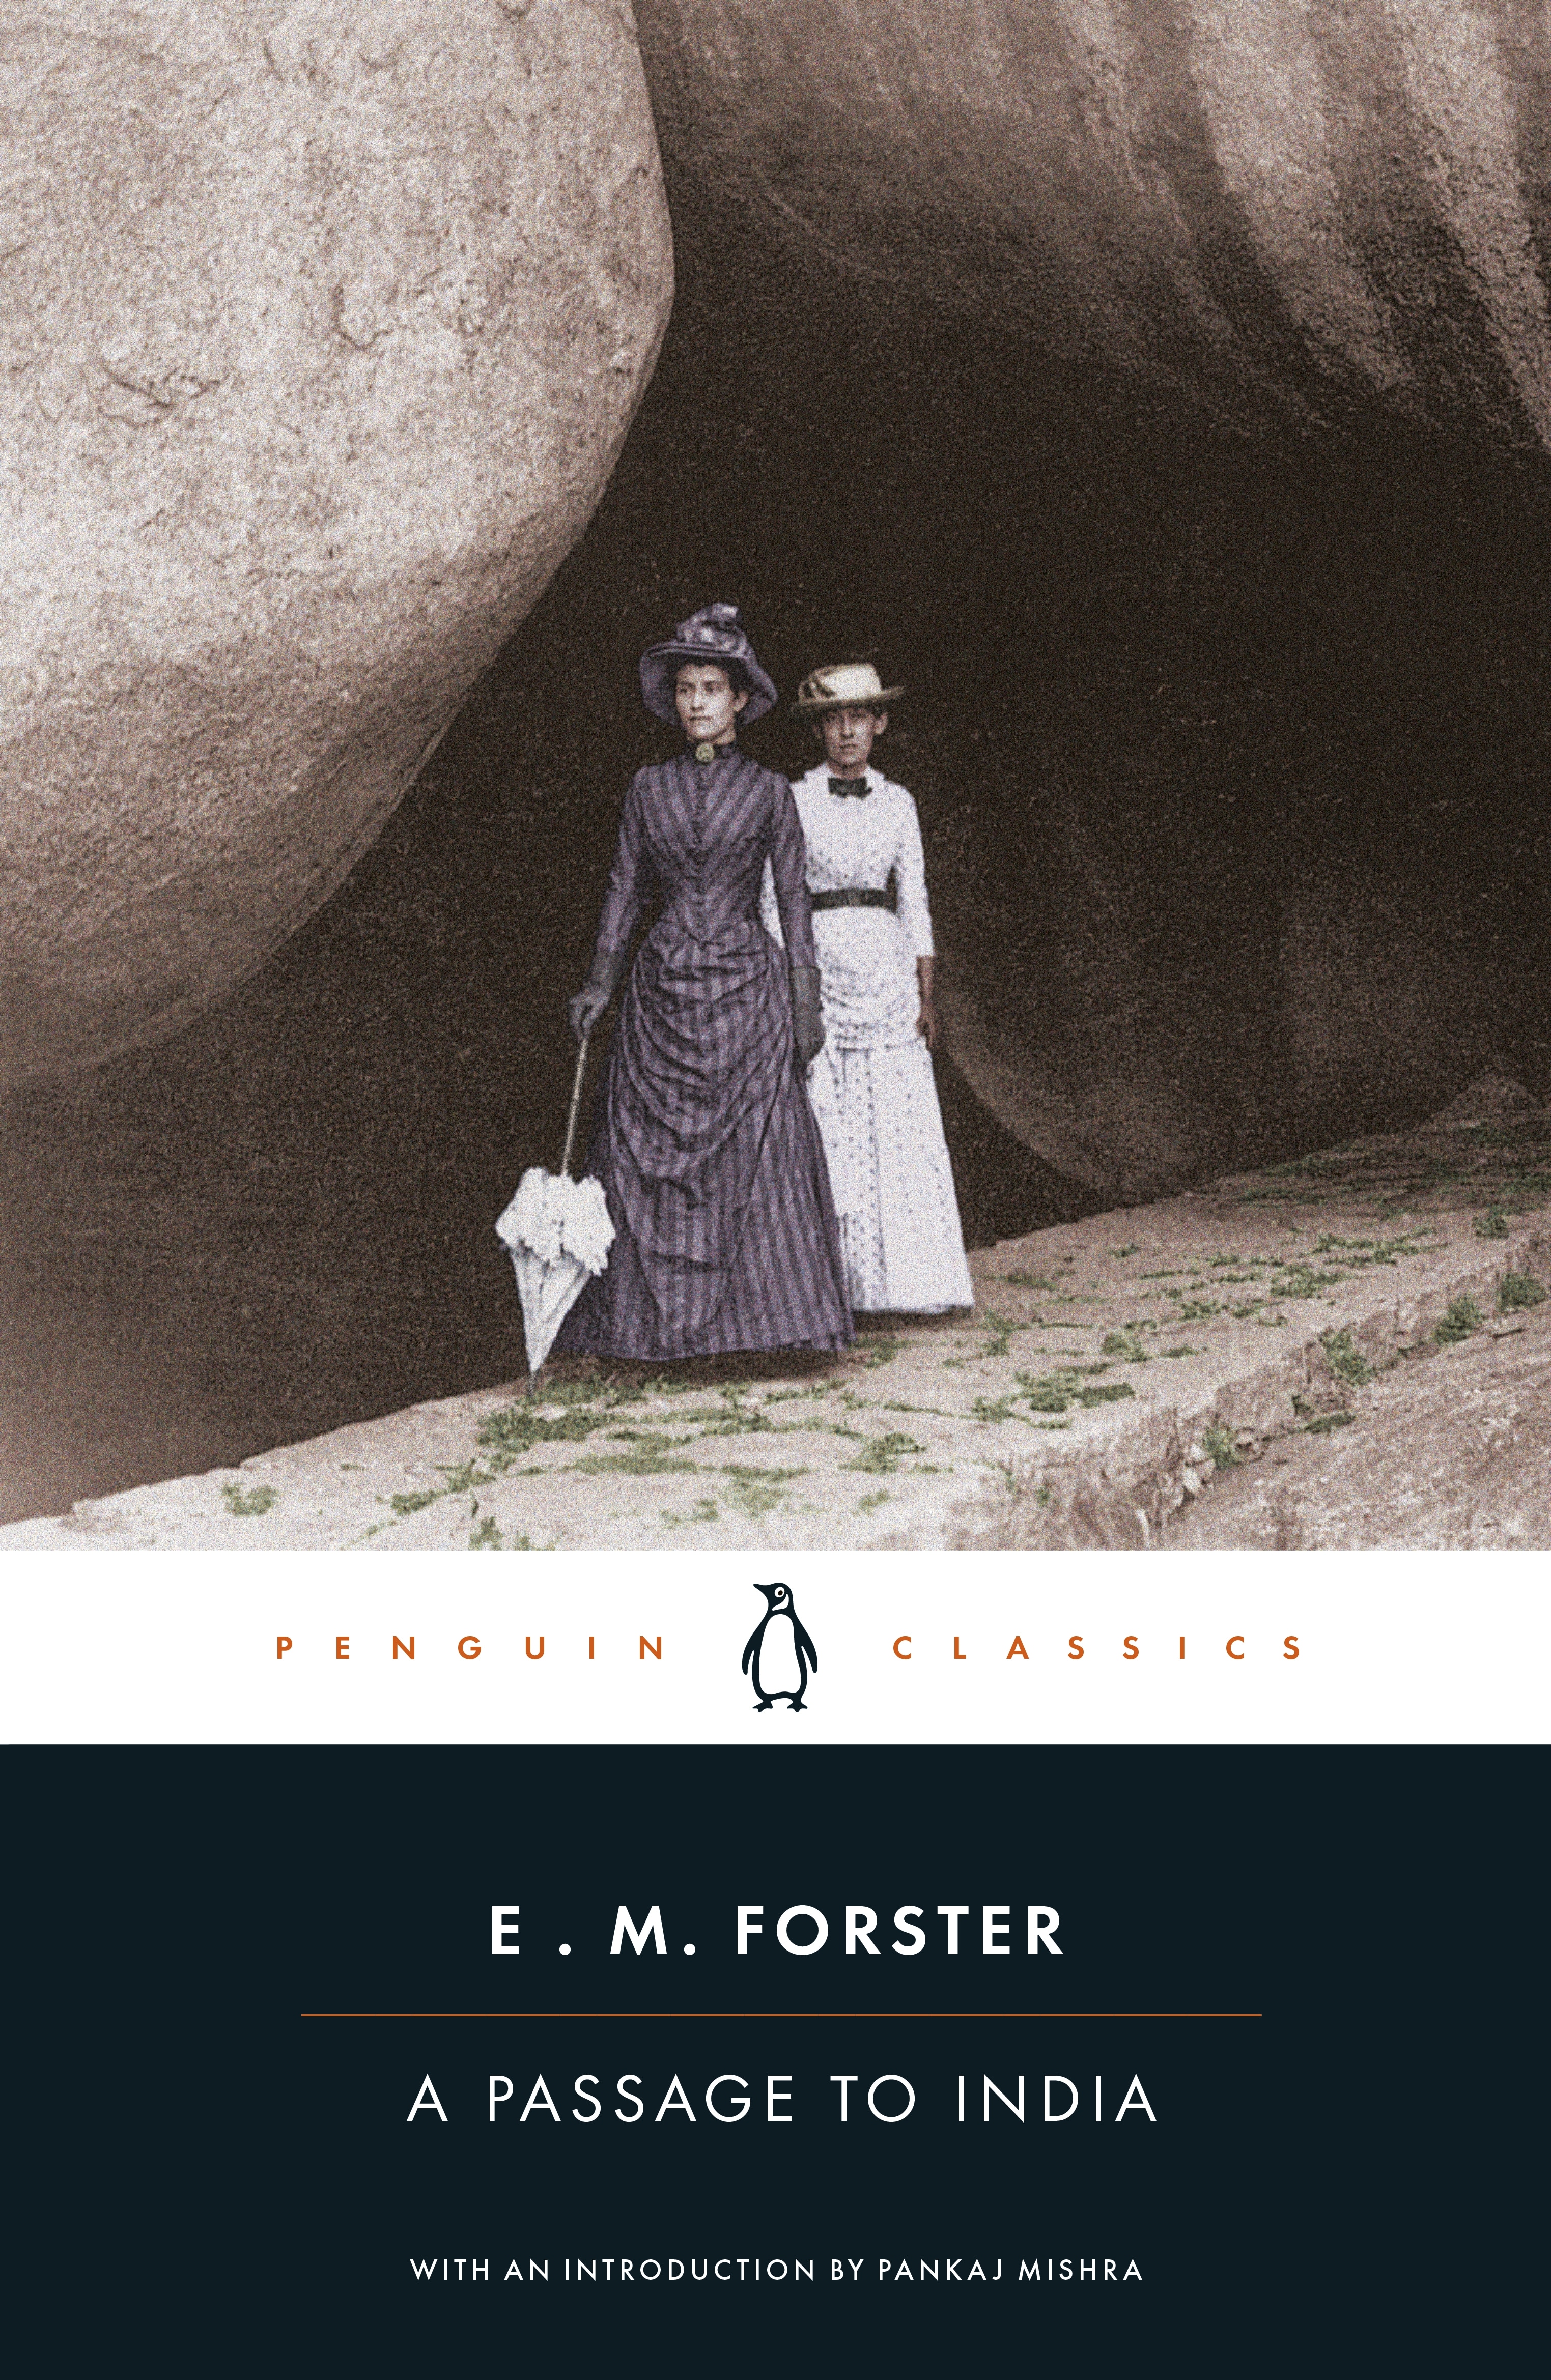 Book “A Passage to India” by E M Forster, Pankaj Mishra — December 2, 2021